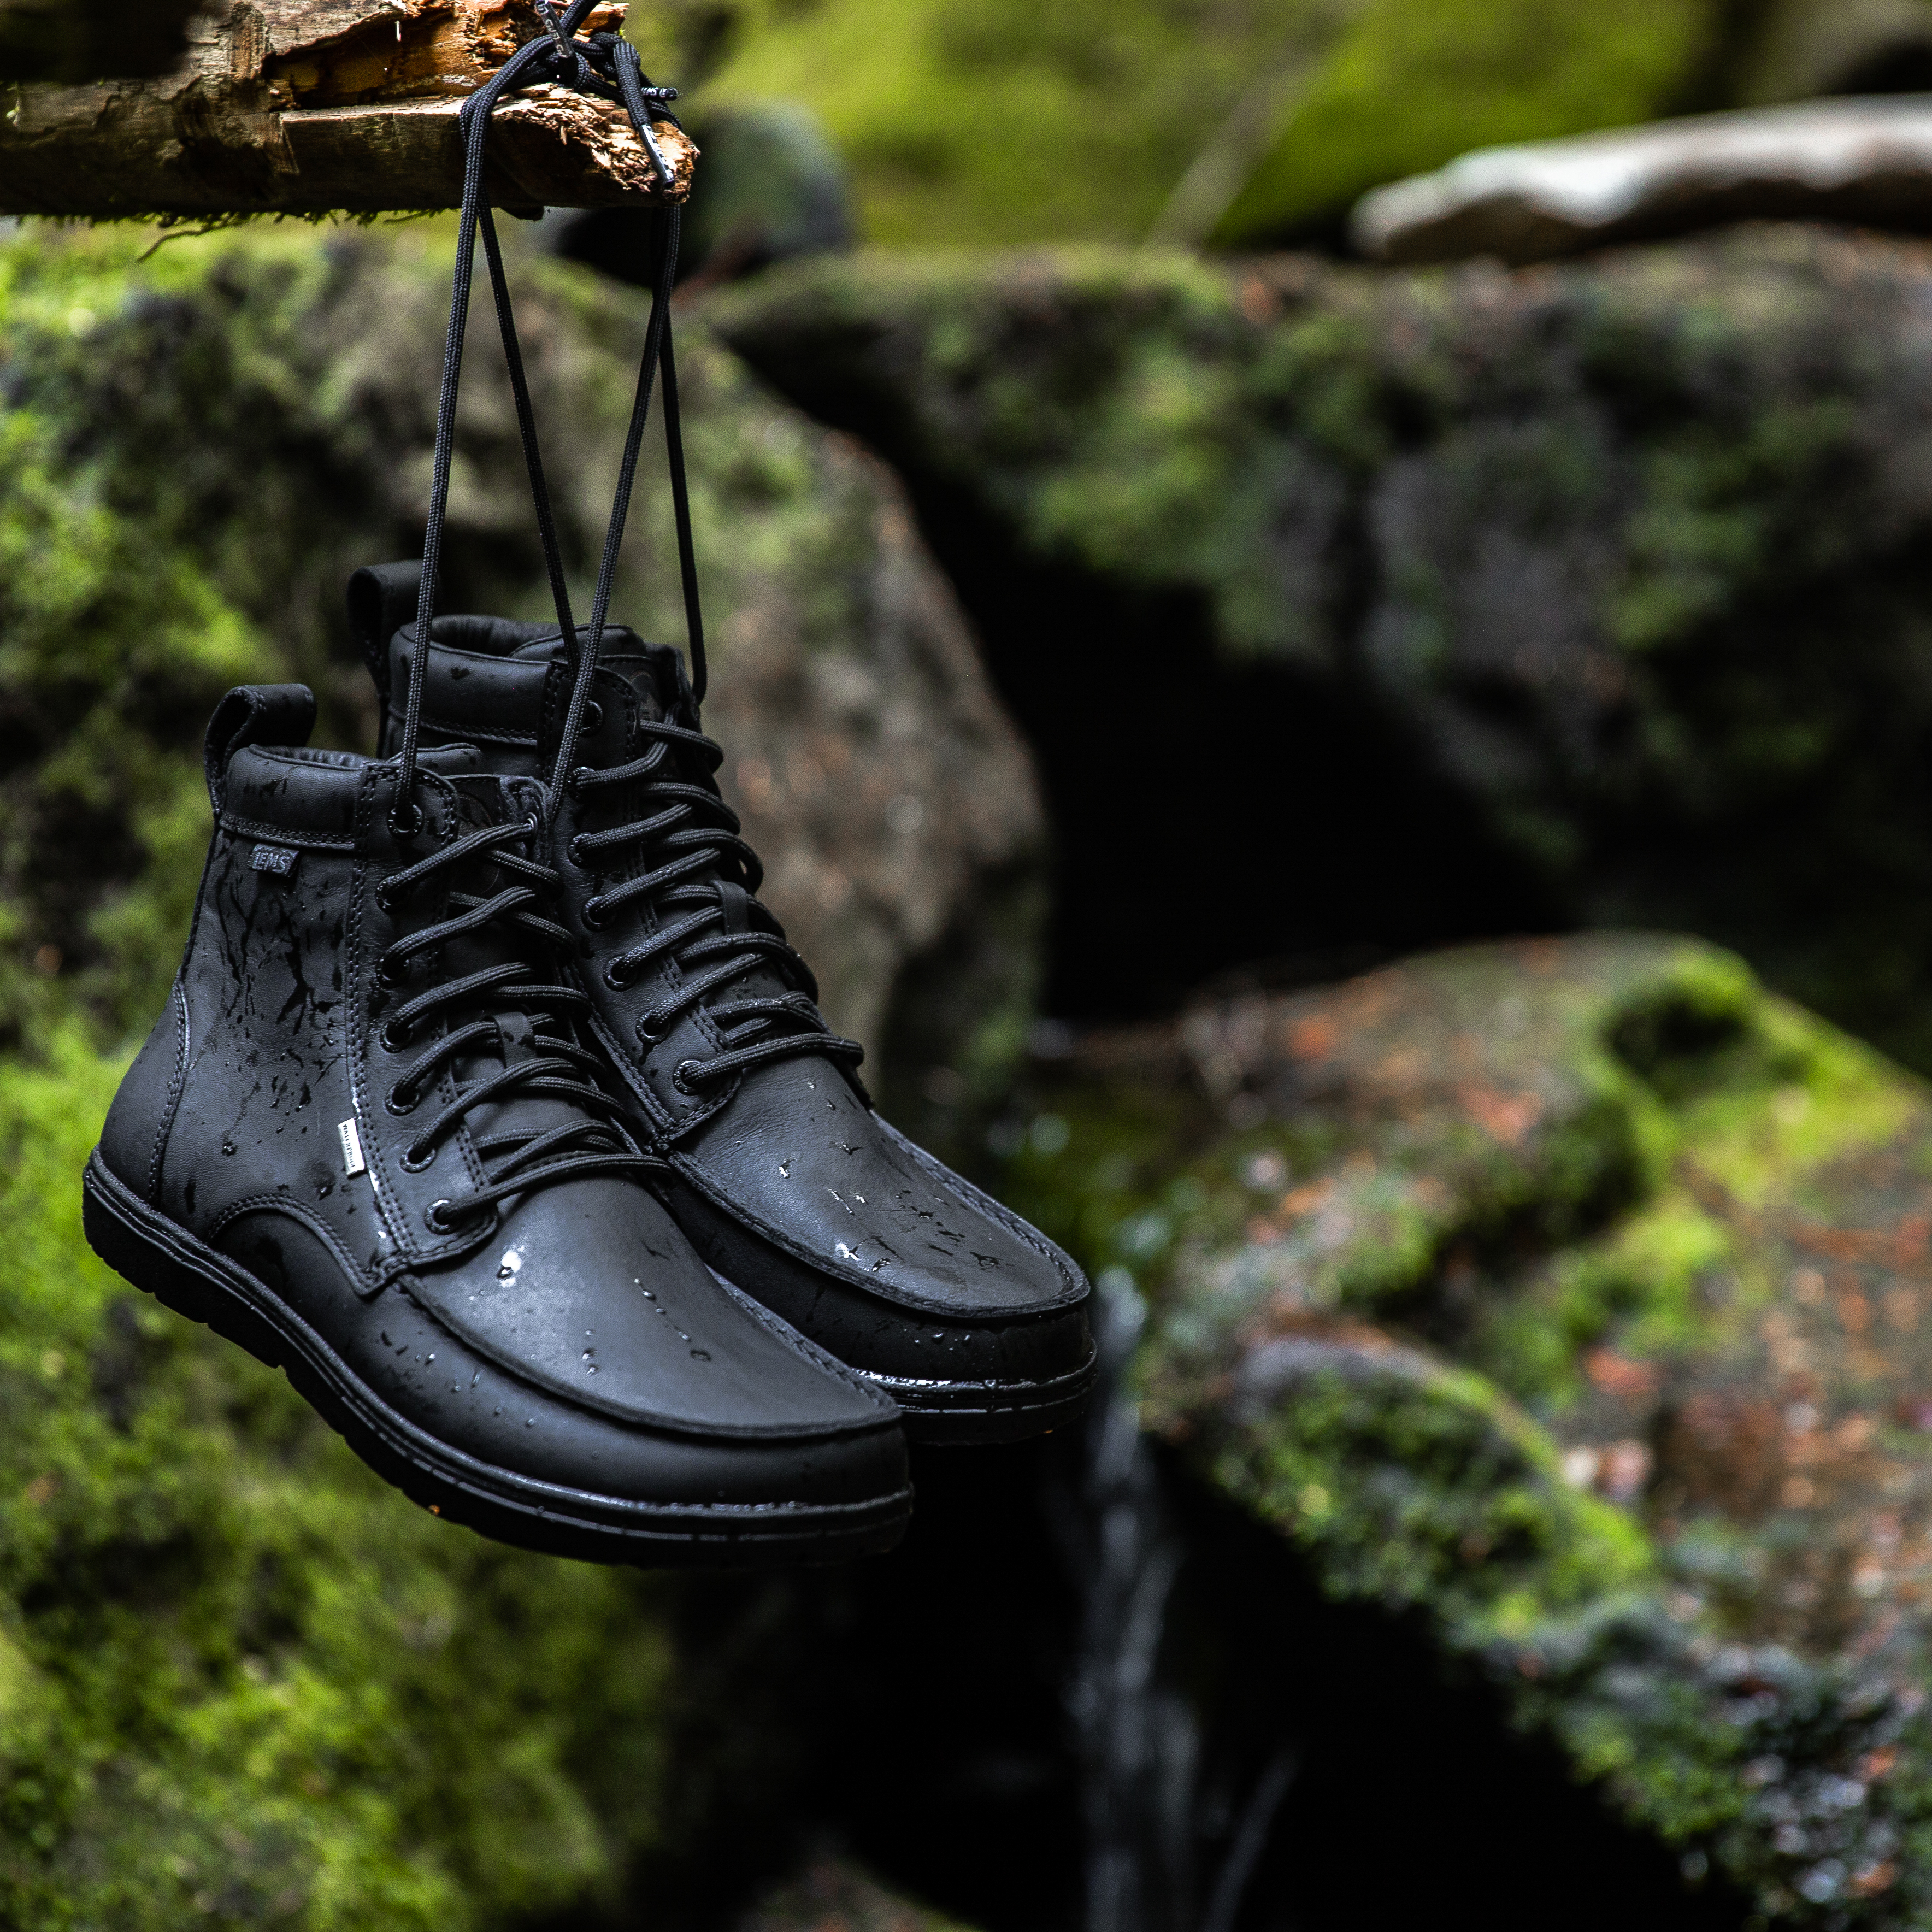 The Best Waterproof Shoes for Men by Nike.